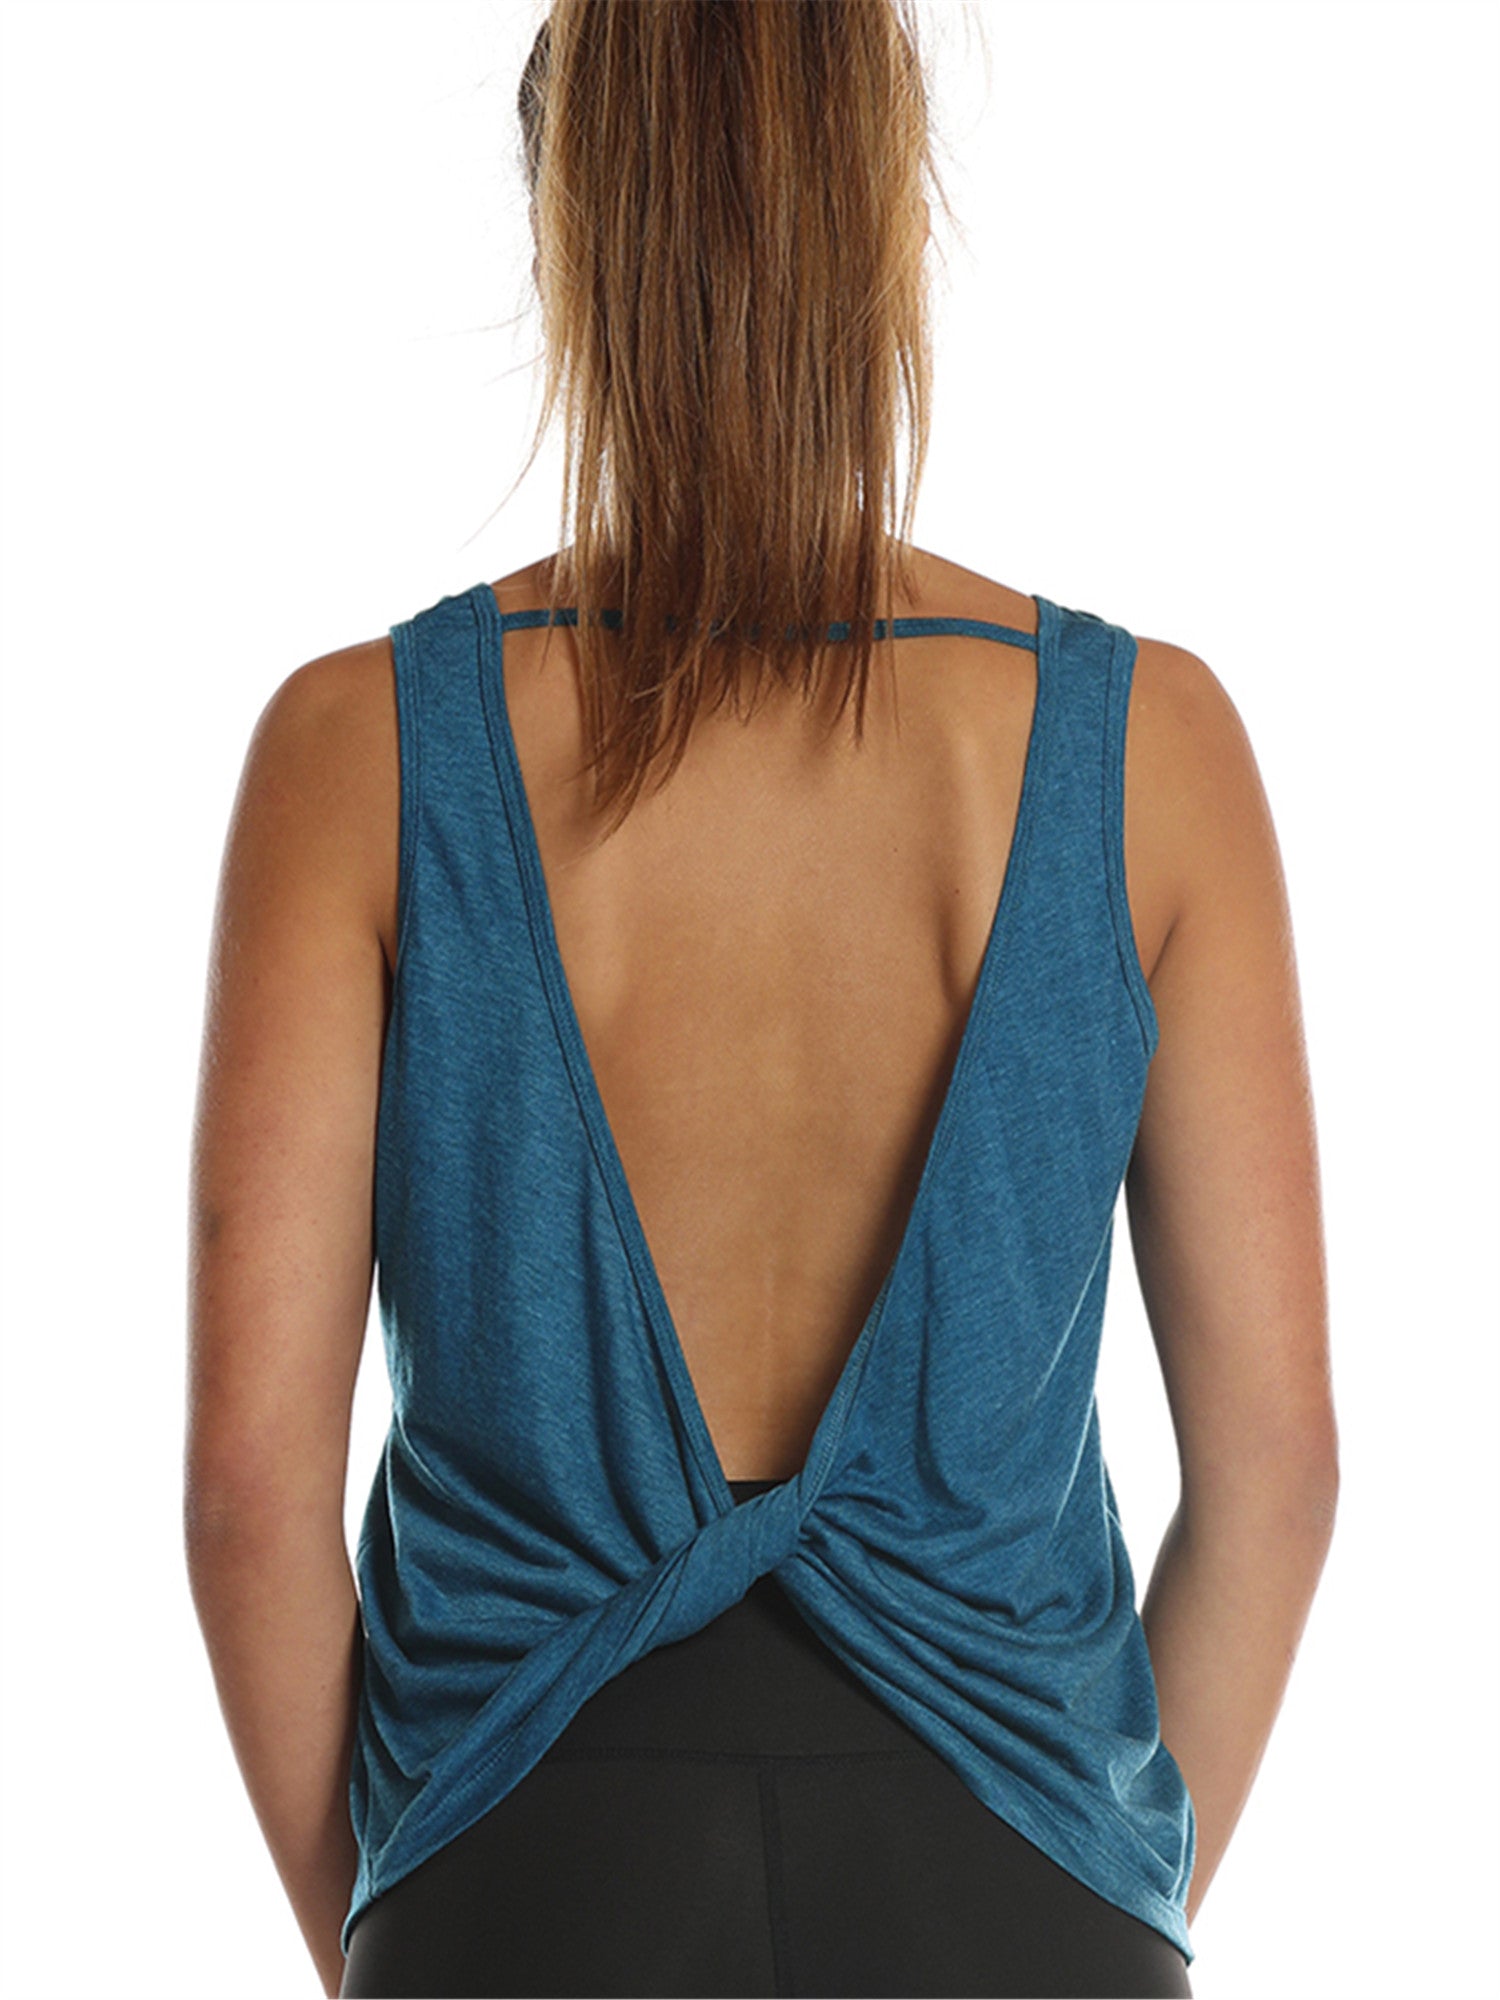 TK26 icyzone Workout Tank Tops for Women - Open Back Strappy Athletic –  icyzonesports